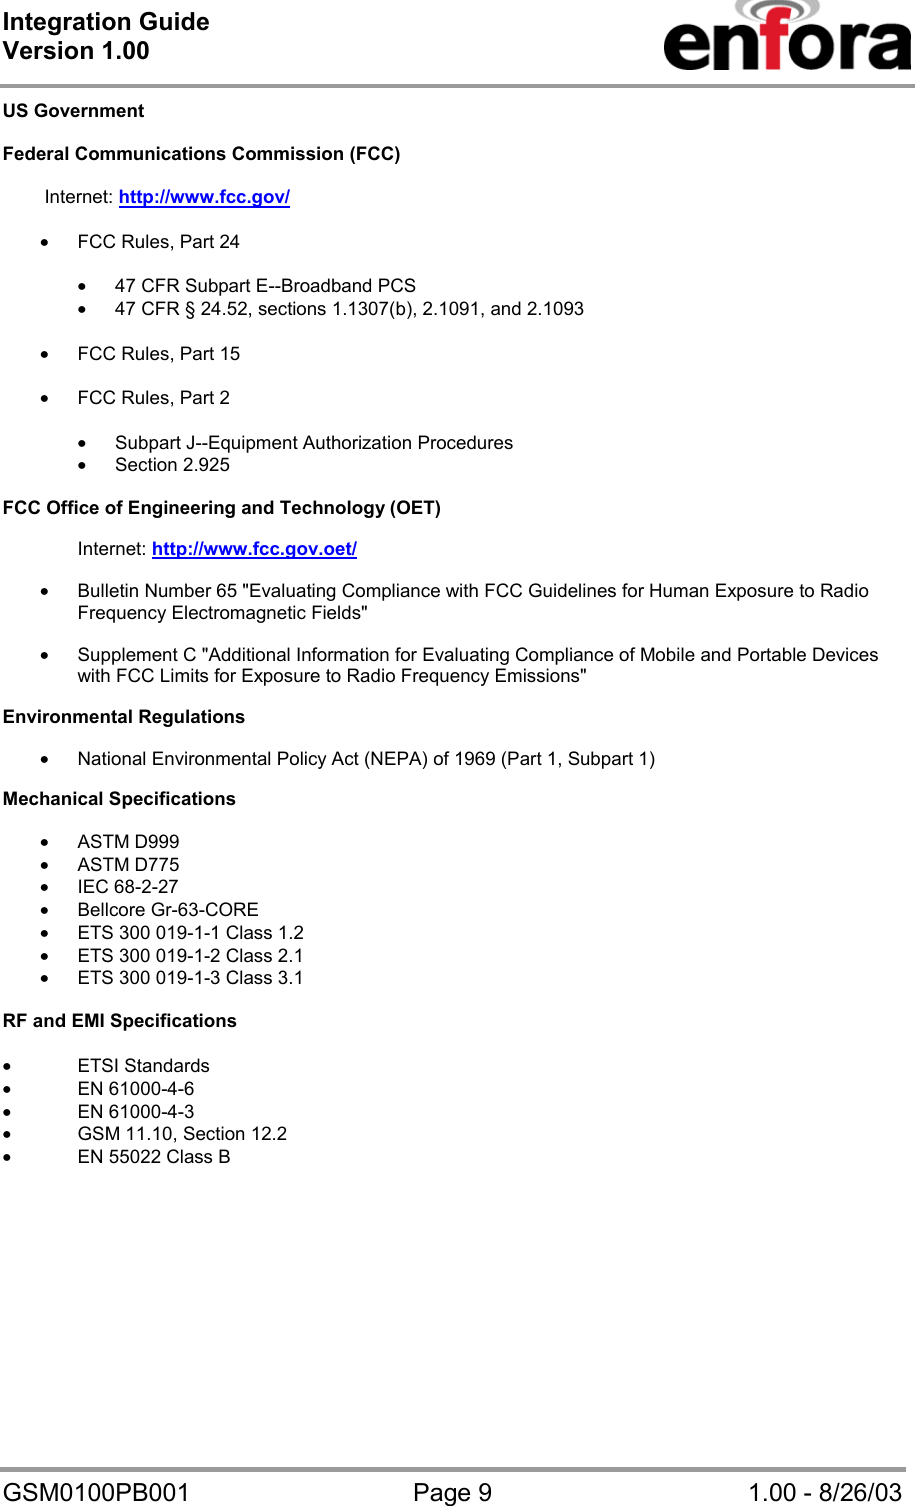 Integration Guide  Version 1.00   GSM0100PB001  Page 9  1.00 - 8/26/03 US Government  Federal Communications Commission (FCC)                 Internet: http://www.fcc.gov/  • FCC Rules, Part 24   • 47 CFR Subpart E--Broadband PCS • 47 CFR § 24.52, sections 1.1307(b), 2.1091, and 2.1093  • FCC Rules, Part 15  • FCC Rules, Part 2  • Subpart J--Equipment Authorization Procedures • Section 2.925  FCC Office of Engineering and Technology (OET)  Internet: http://www.fcc.gov.oet/  • Bulletin Number 65 &quot;Evaluating Compliance with FCC Guidelines for Human Exposure to Radio Frequency Electromagnetic Fields&quot;  • Supplement C &quot;Additional Information for Evaluating Compliance of Mobile and Portable Devices with FCC Limits for Exposure to Radio Frequency Emissions&quot;  Environmental Regulations  • National Environmental Policy Act (NEPA) of 1969 (Part 1, Subpart 1)  Mechanical Specifications  • ASTM D999 • ASTM D775 • IEC 68-2-27 • Bellcore Gr-63-CORE • ETS 300 019-1-1 Class 1.2 • ETS 300 019-1-2 Class 2.1 • ETS 300 019-1-3 Class 3.1  RF and EMI Specifications  • ETSI Standards • EN 61000-4-6 • EN 61000-4-3 • GSM 11.10, Section 12.2 • EN 55022 Class B   